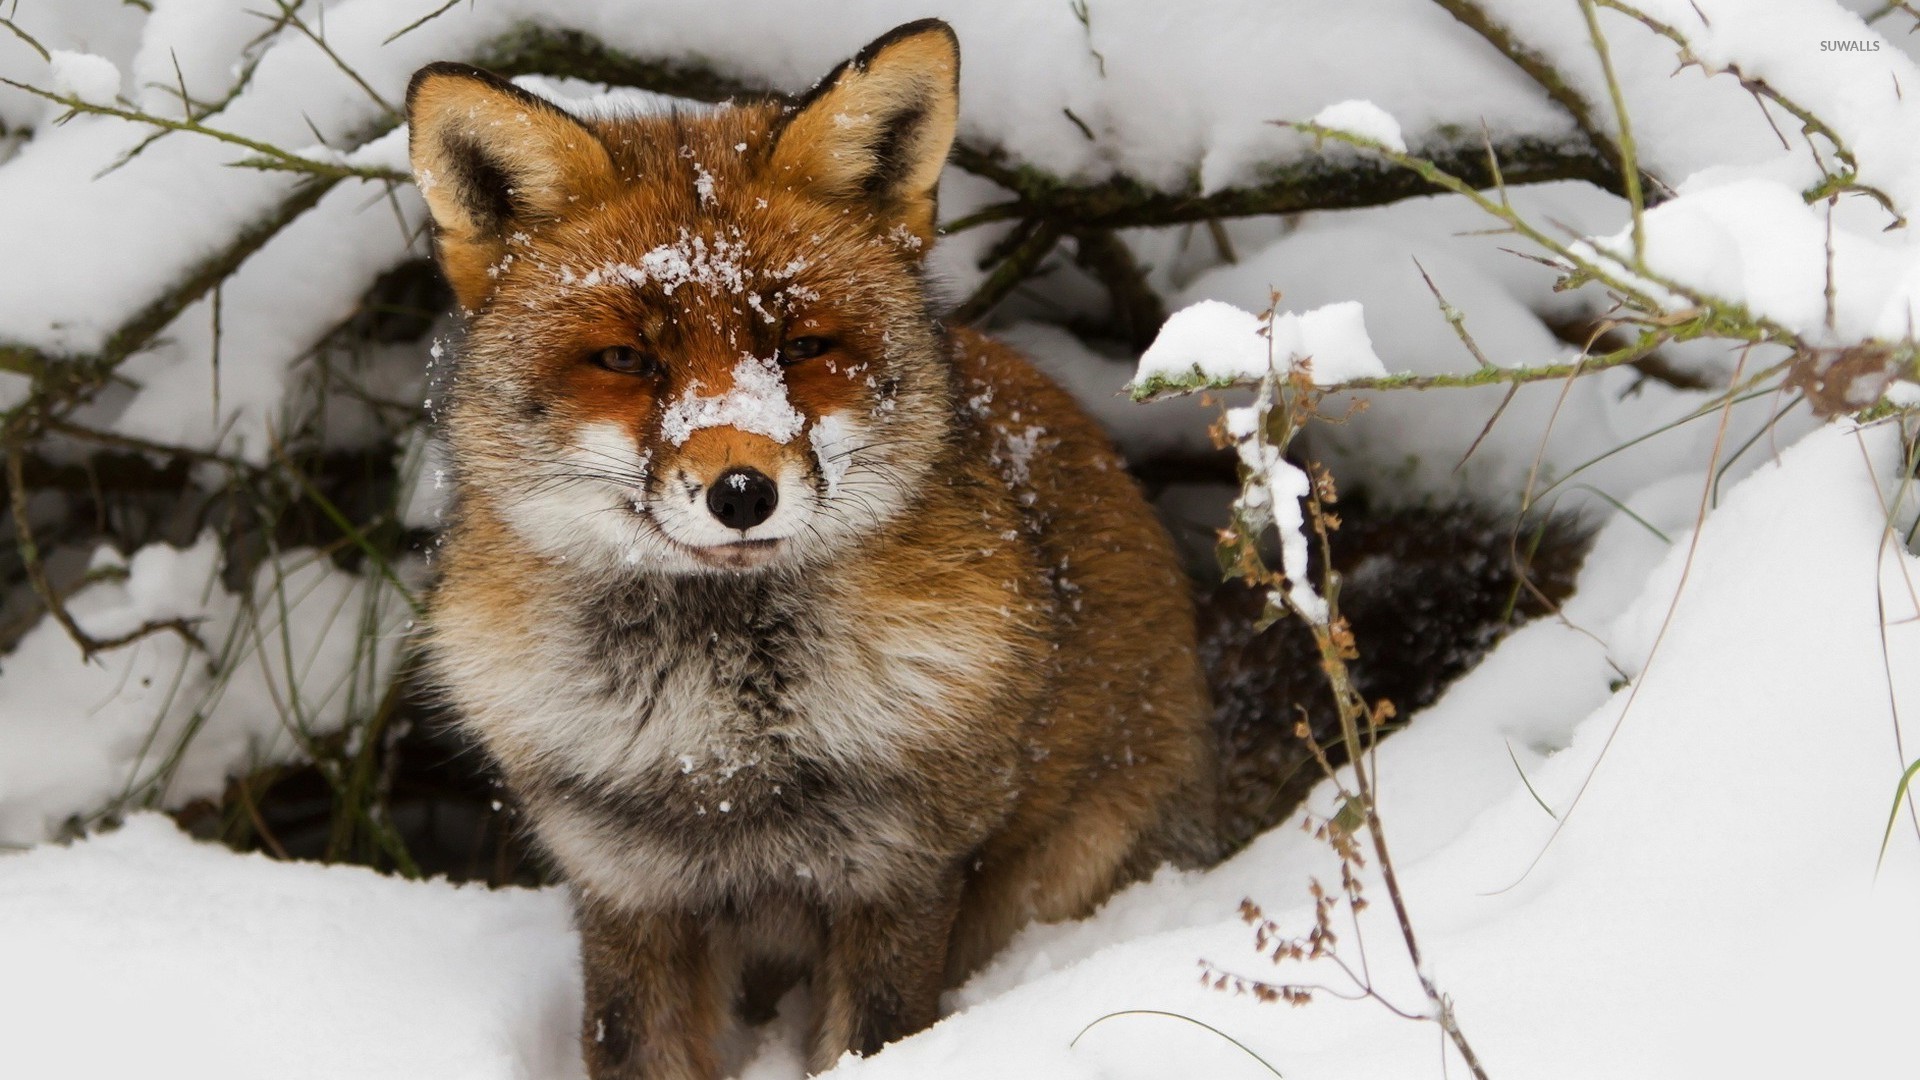 Fox in the snow wallpaper   Animal wallpapers   25656 1920x1080